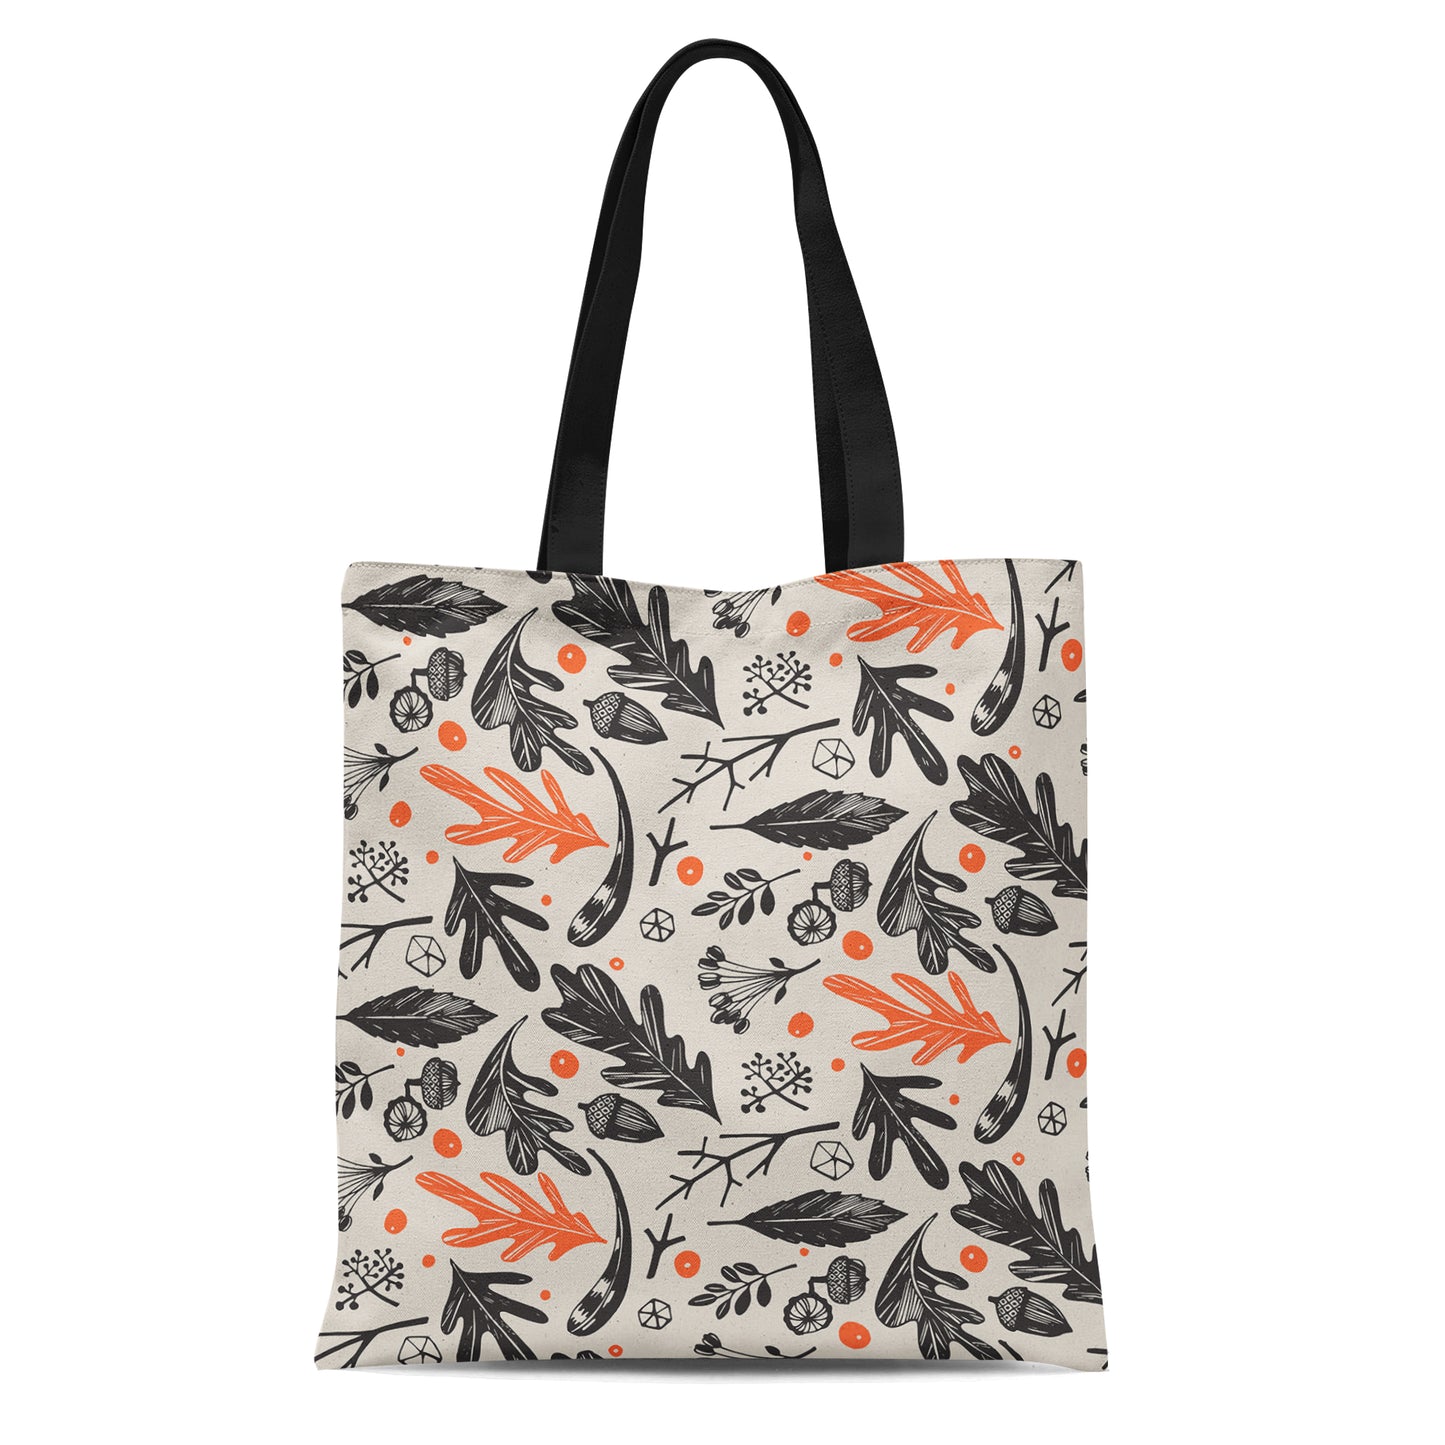 Tote Bag with autumn print